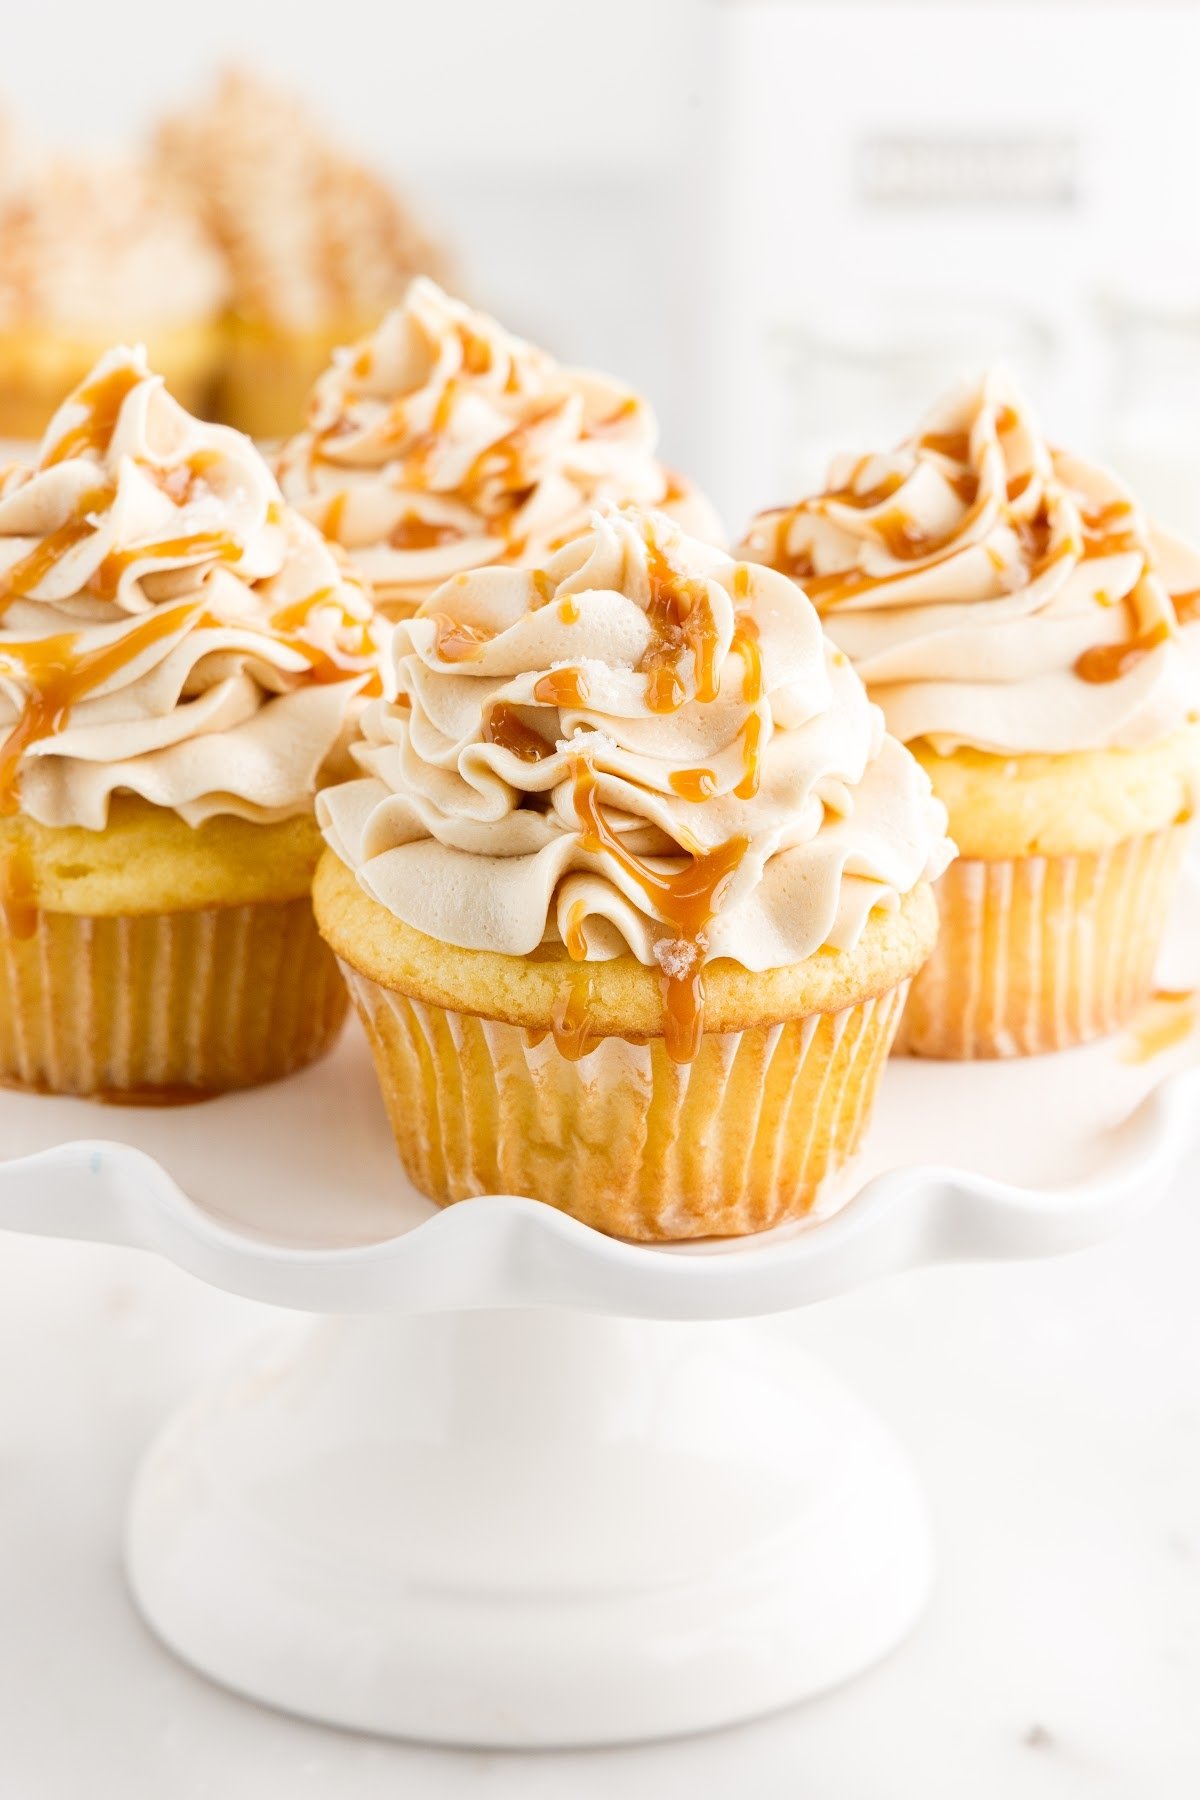 Drizzled caramel sauce on top of the frosted cupcakes.